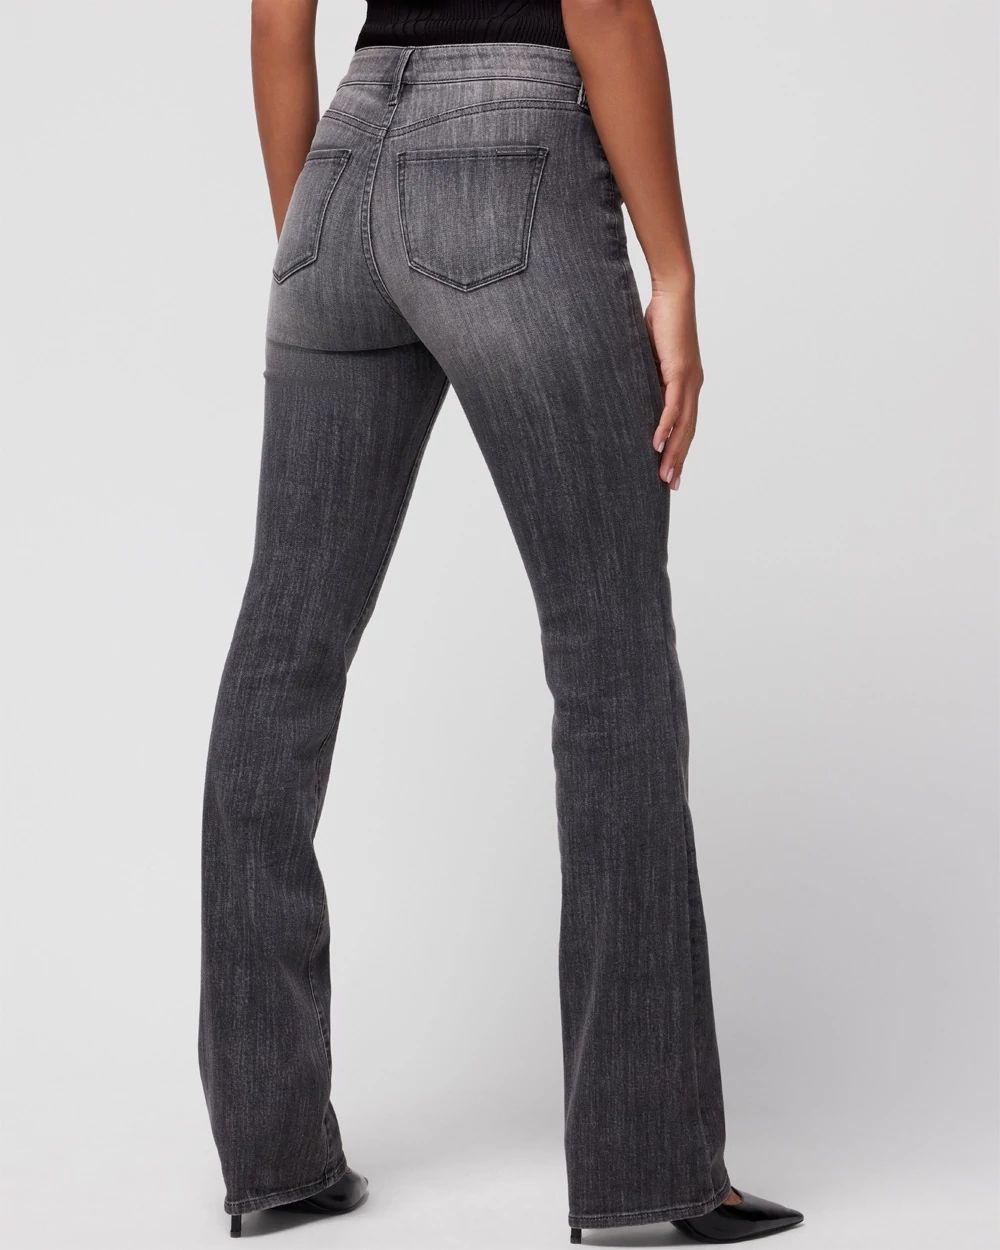 Petite Mid-Rise Bootcut Jeans click to view larger image.